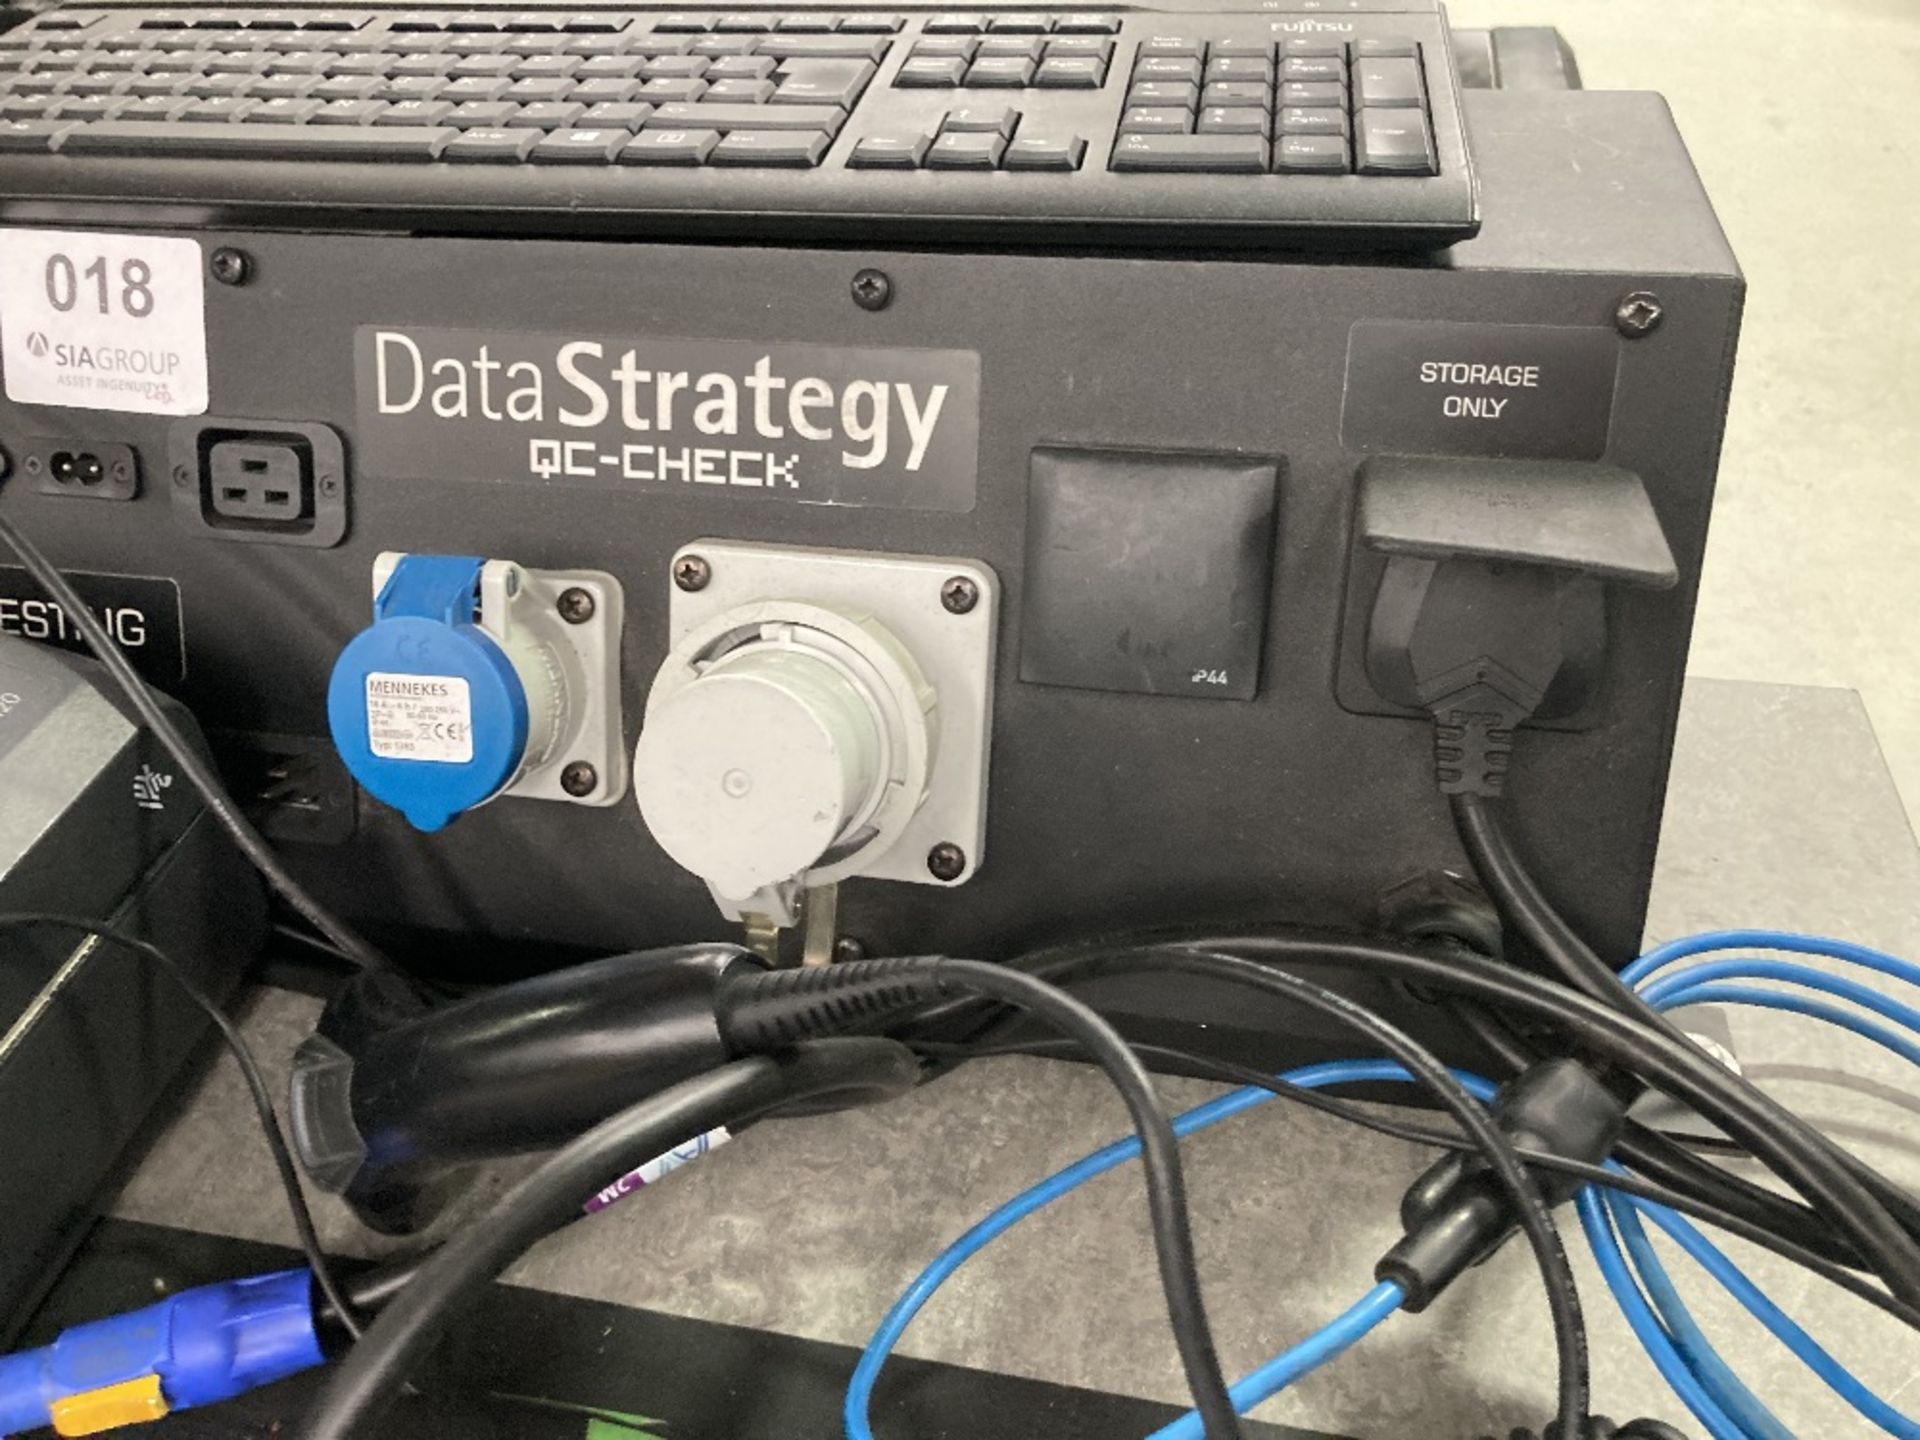 Data Strategy QC-Check Desk Mount Portable Appliance Test Processor PAT-4 - Image 6 of 10